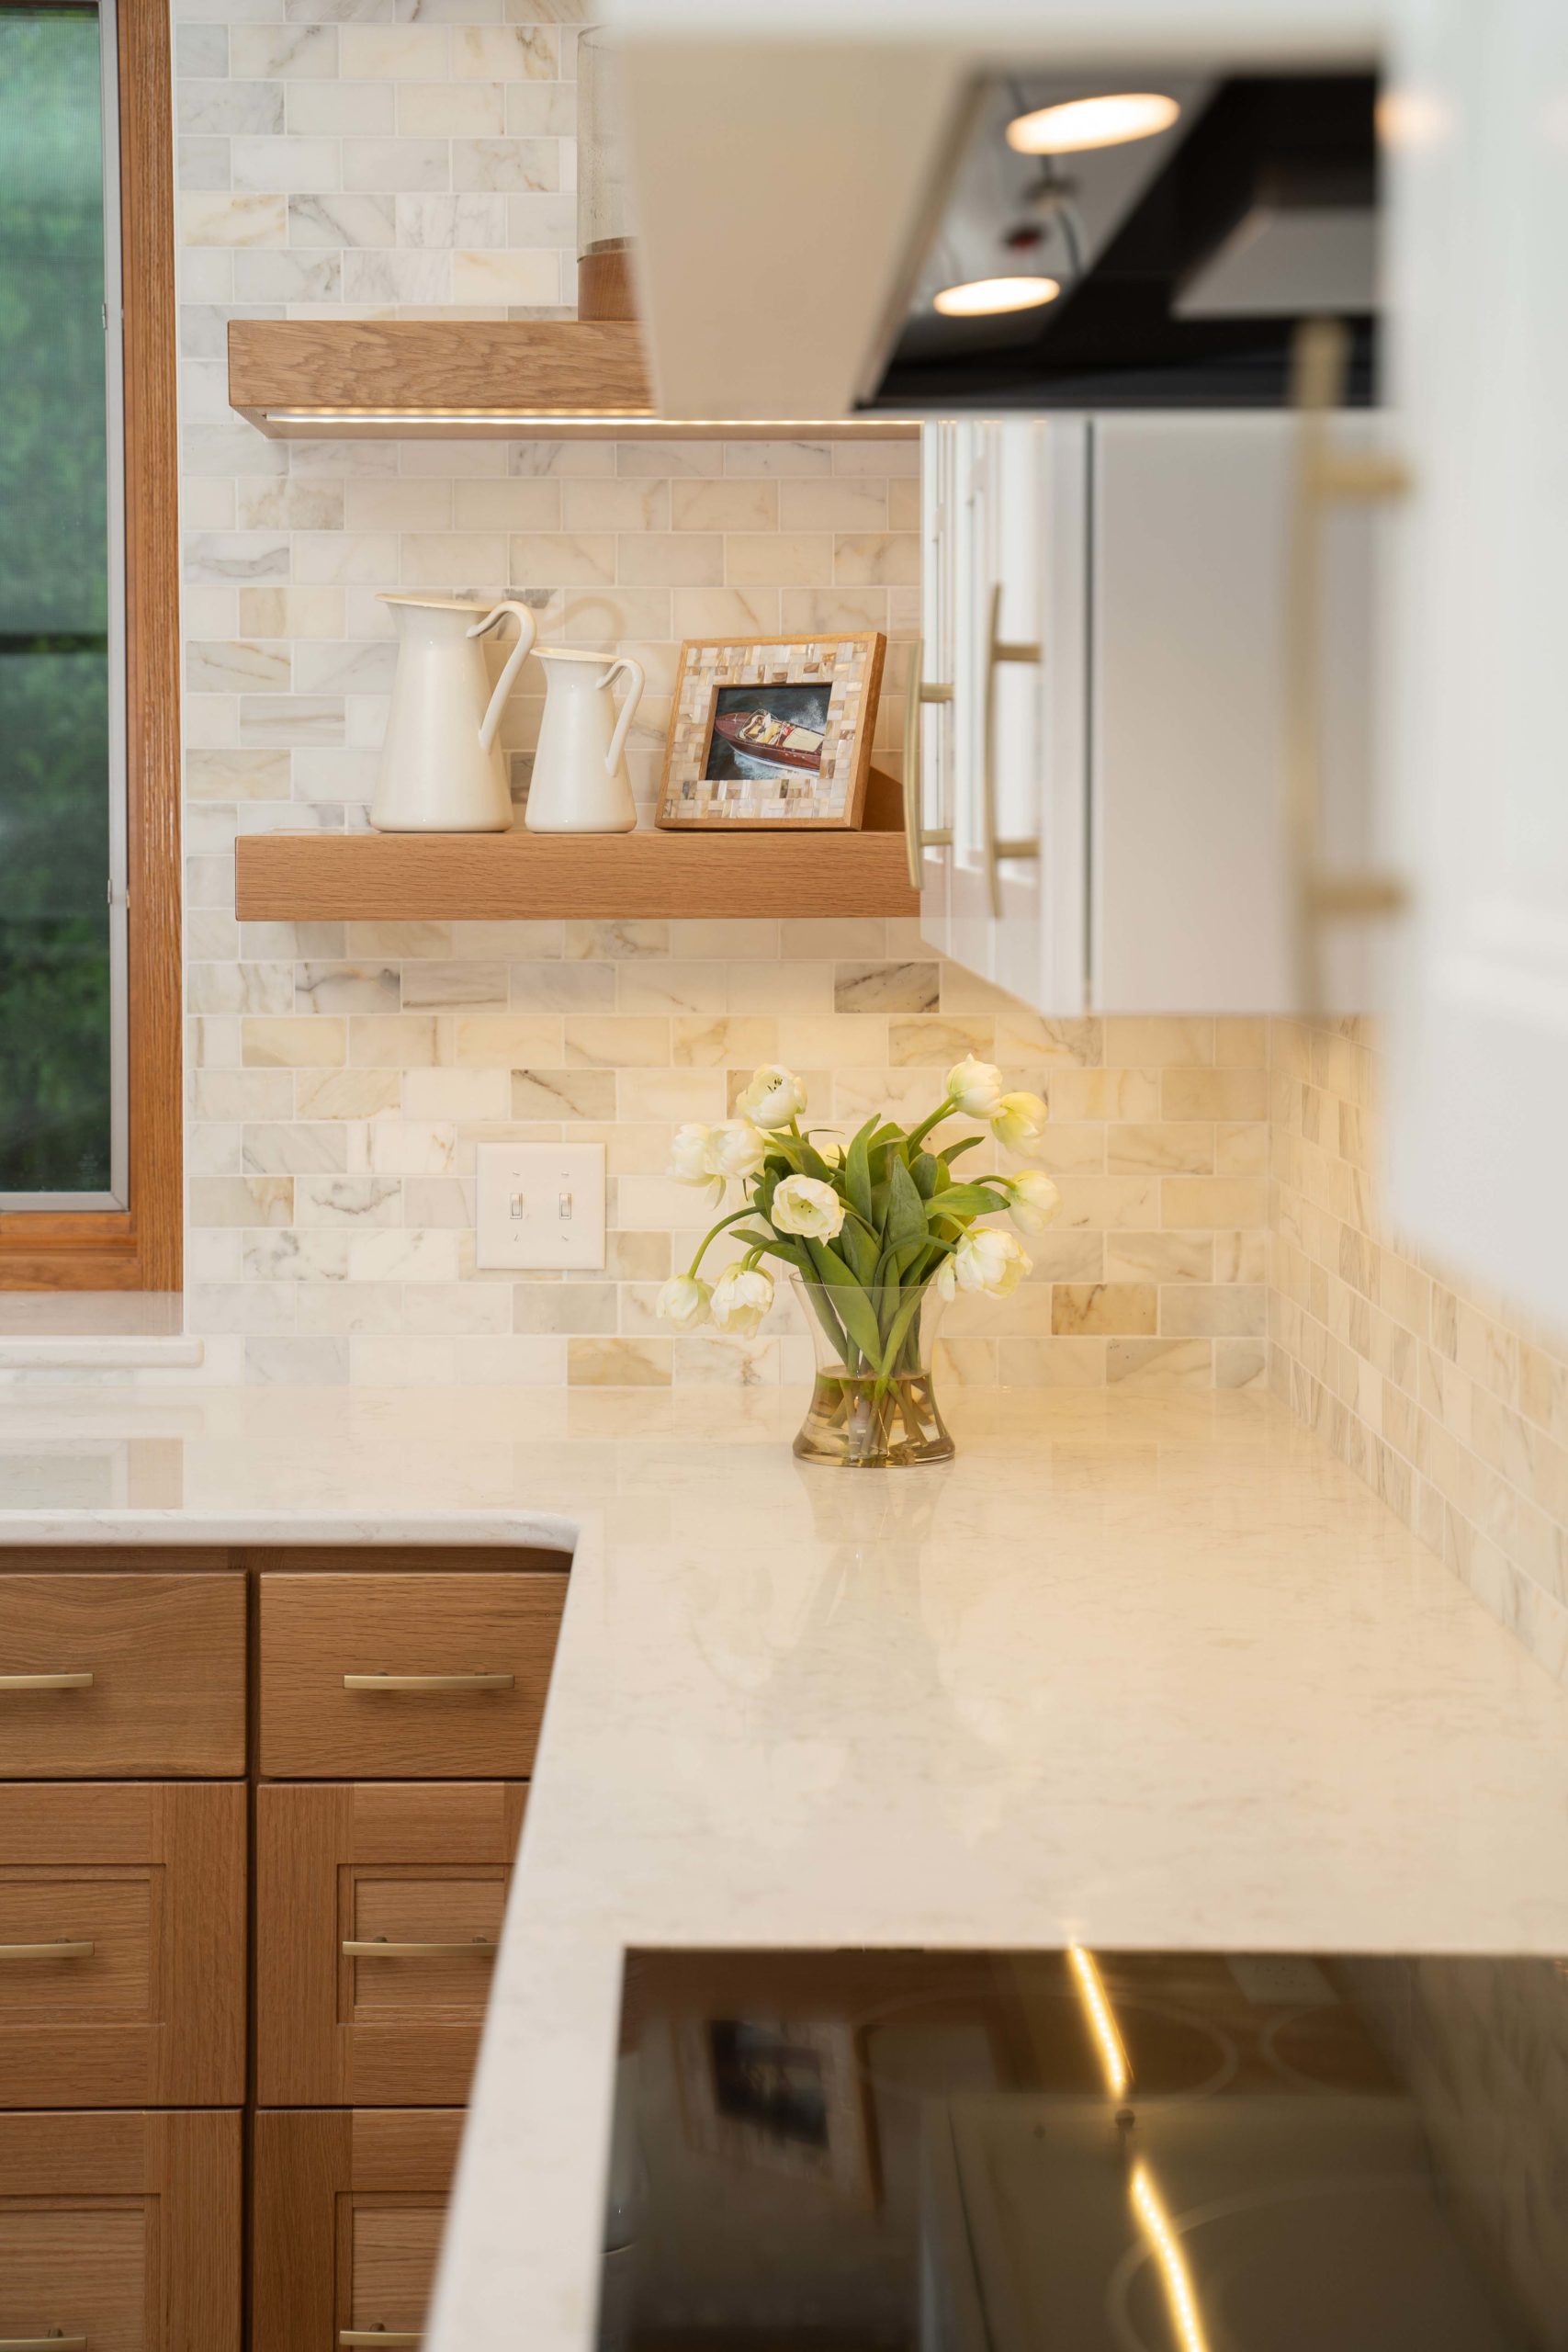 A white kitchen with a wooden counter top that has undergone a kitchen remodel.